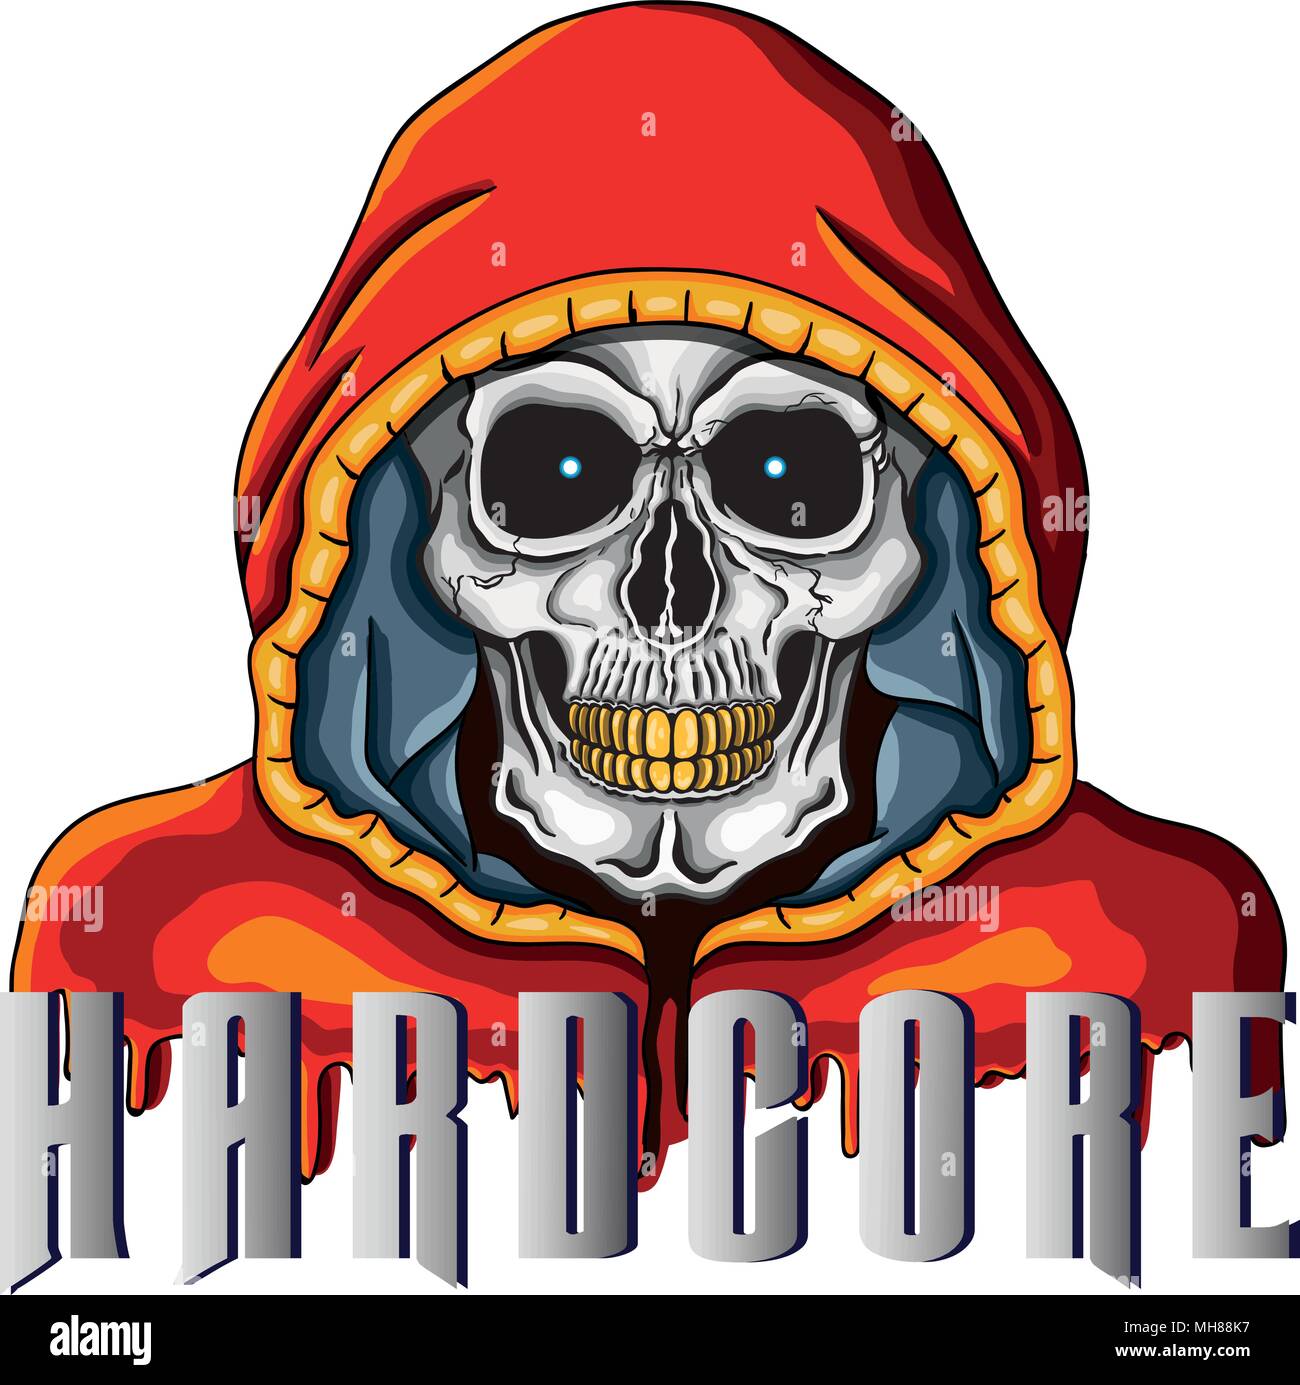 Vector illustration of human skull with golden teeth and red hood and word 'Hardcore'. Stock Vector